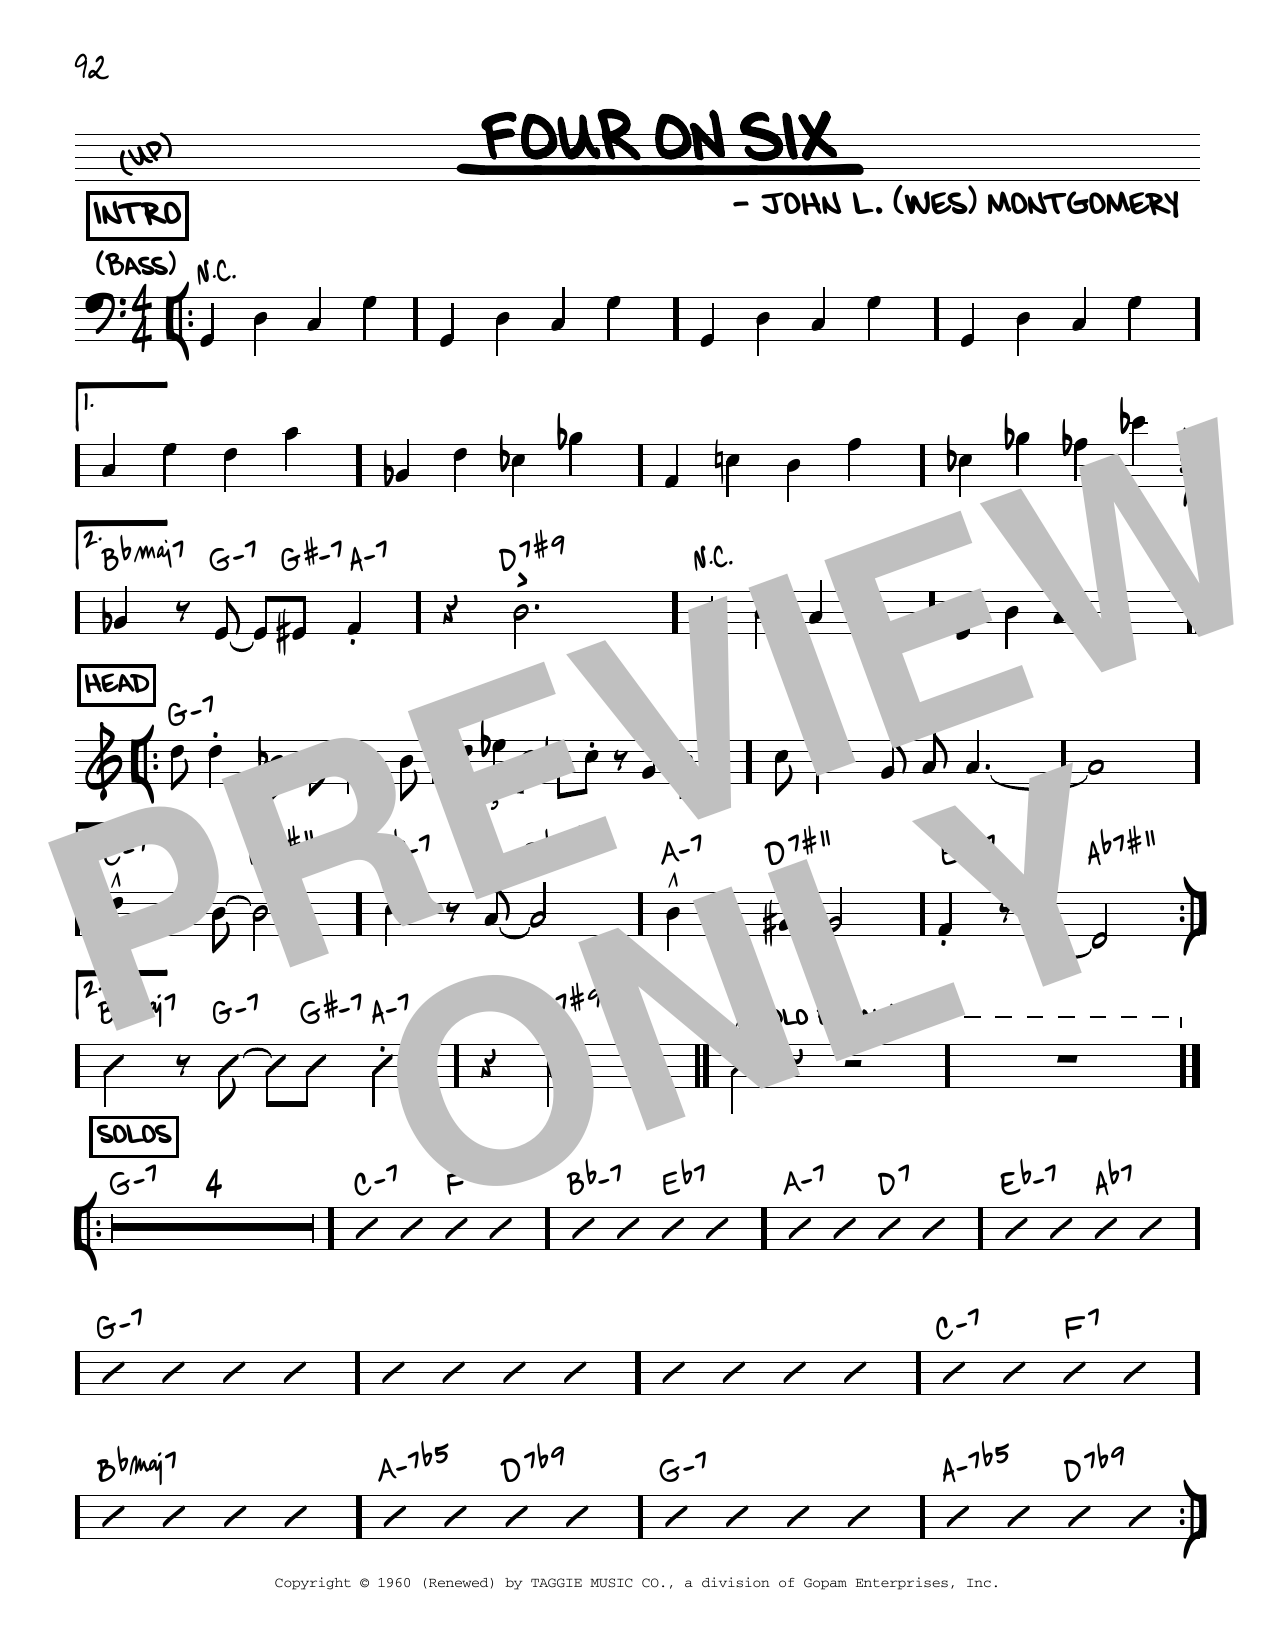 Wes Montgomery Four On Six sheet music notes and chords - Download Printable PDF and start playing in minutes.